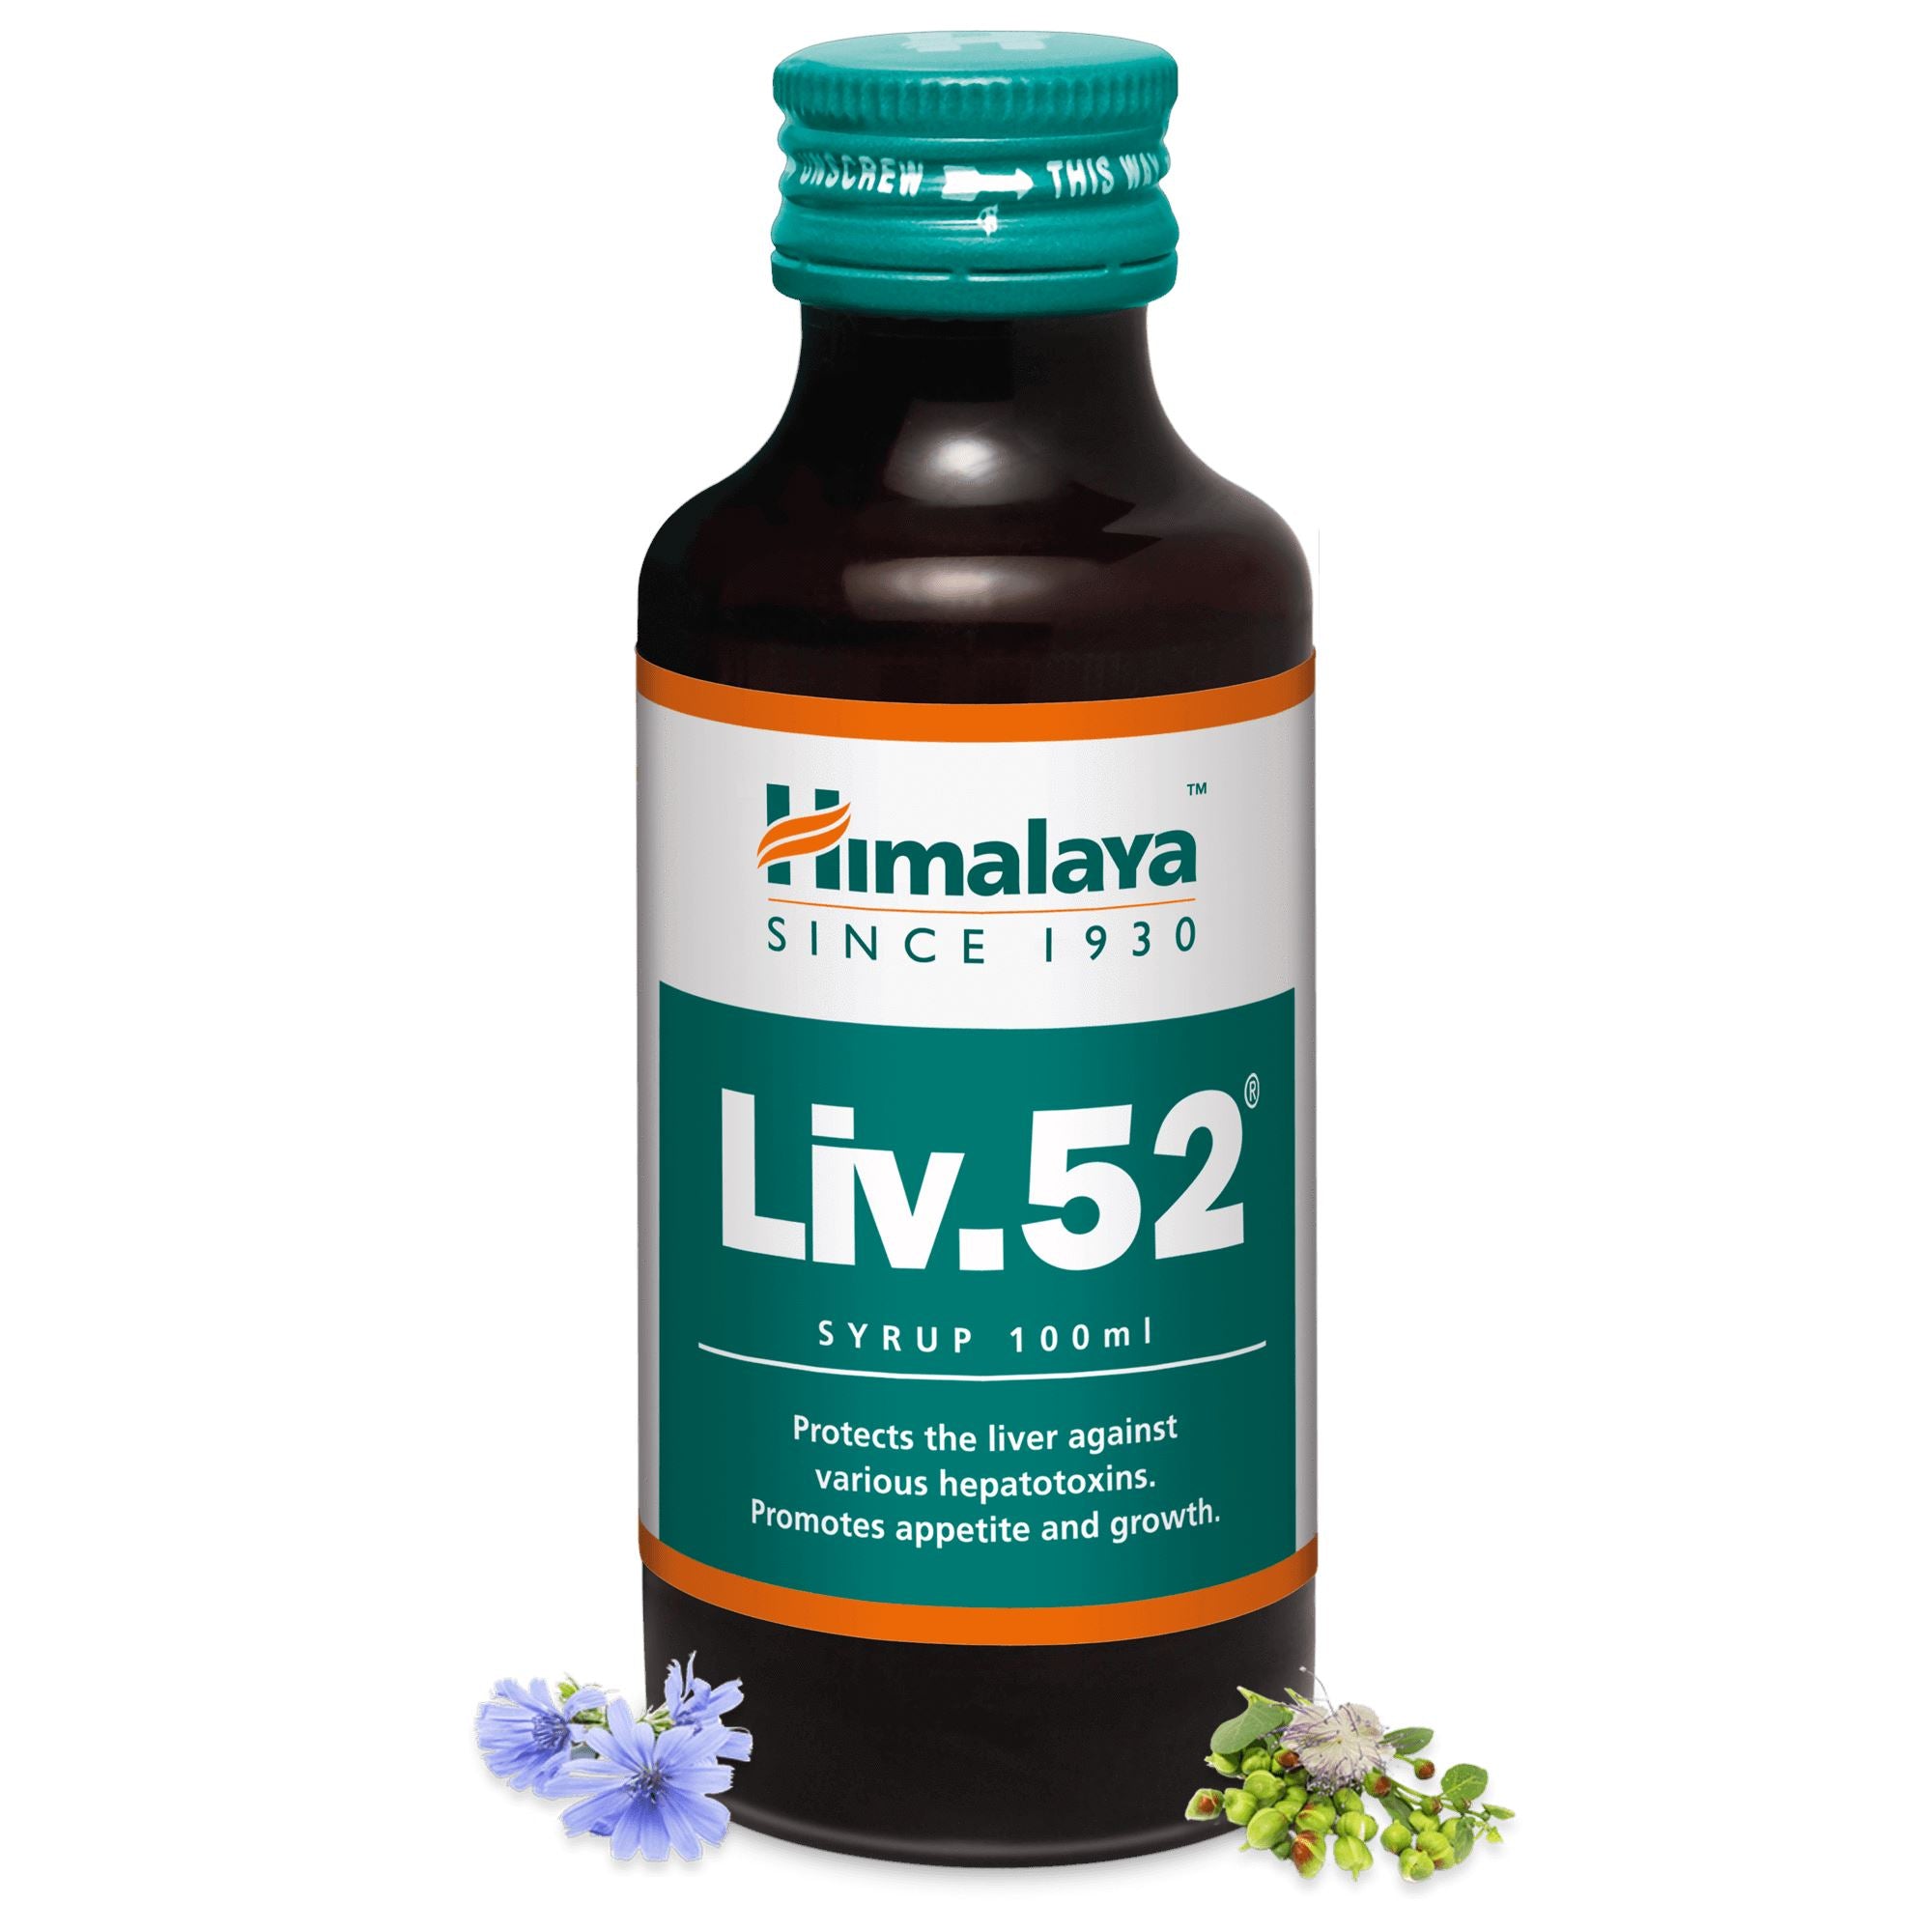 Himalaya Liv.52 Syrup - Protects the liver when taking liver-toxic medicine or alcohol